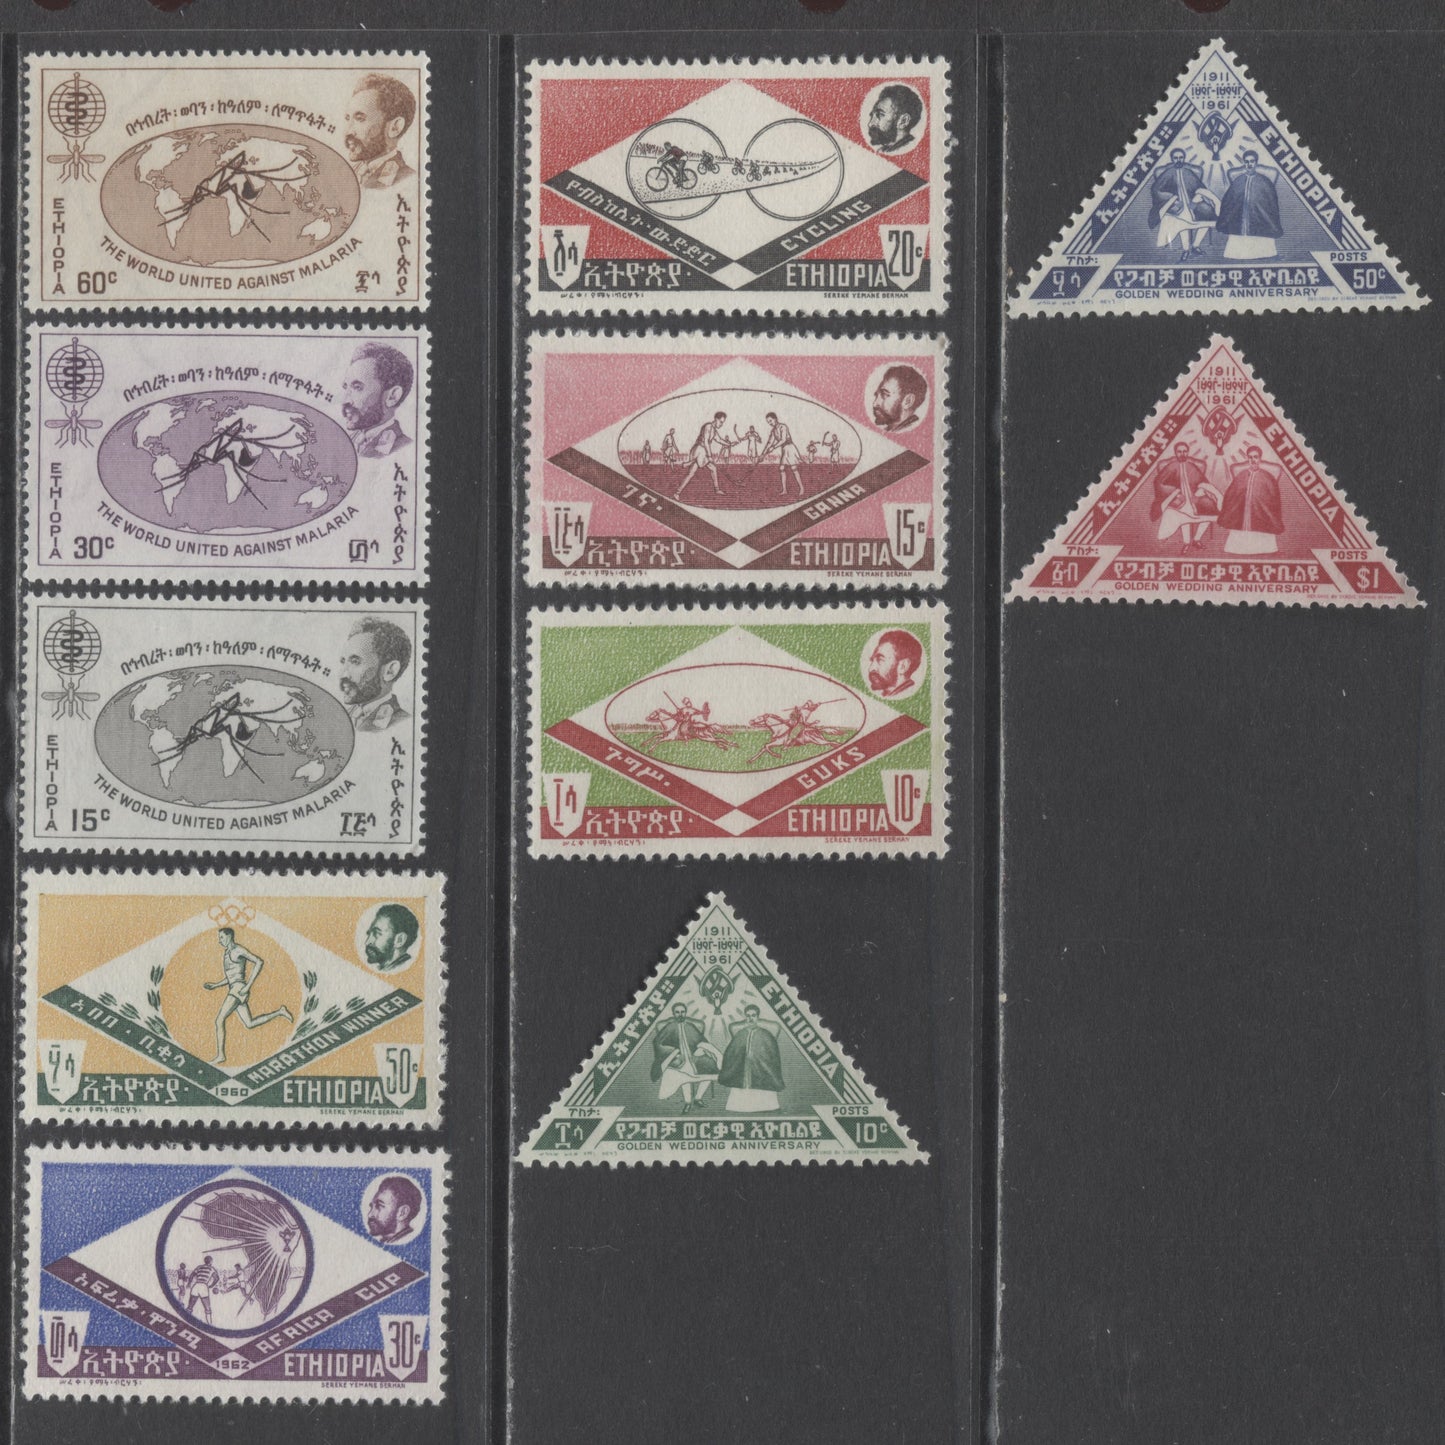 Lot 523 Ethiopia SC#375-385  1961-1962, Commemoratives, 11 F/VF NH Singles, 2017 Scott Cat. $20.05 USD, Click on Listing to See ALL Pictures